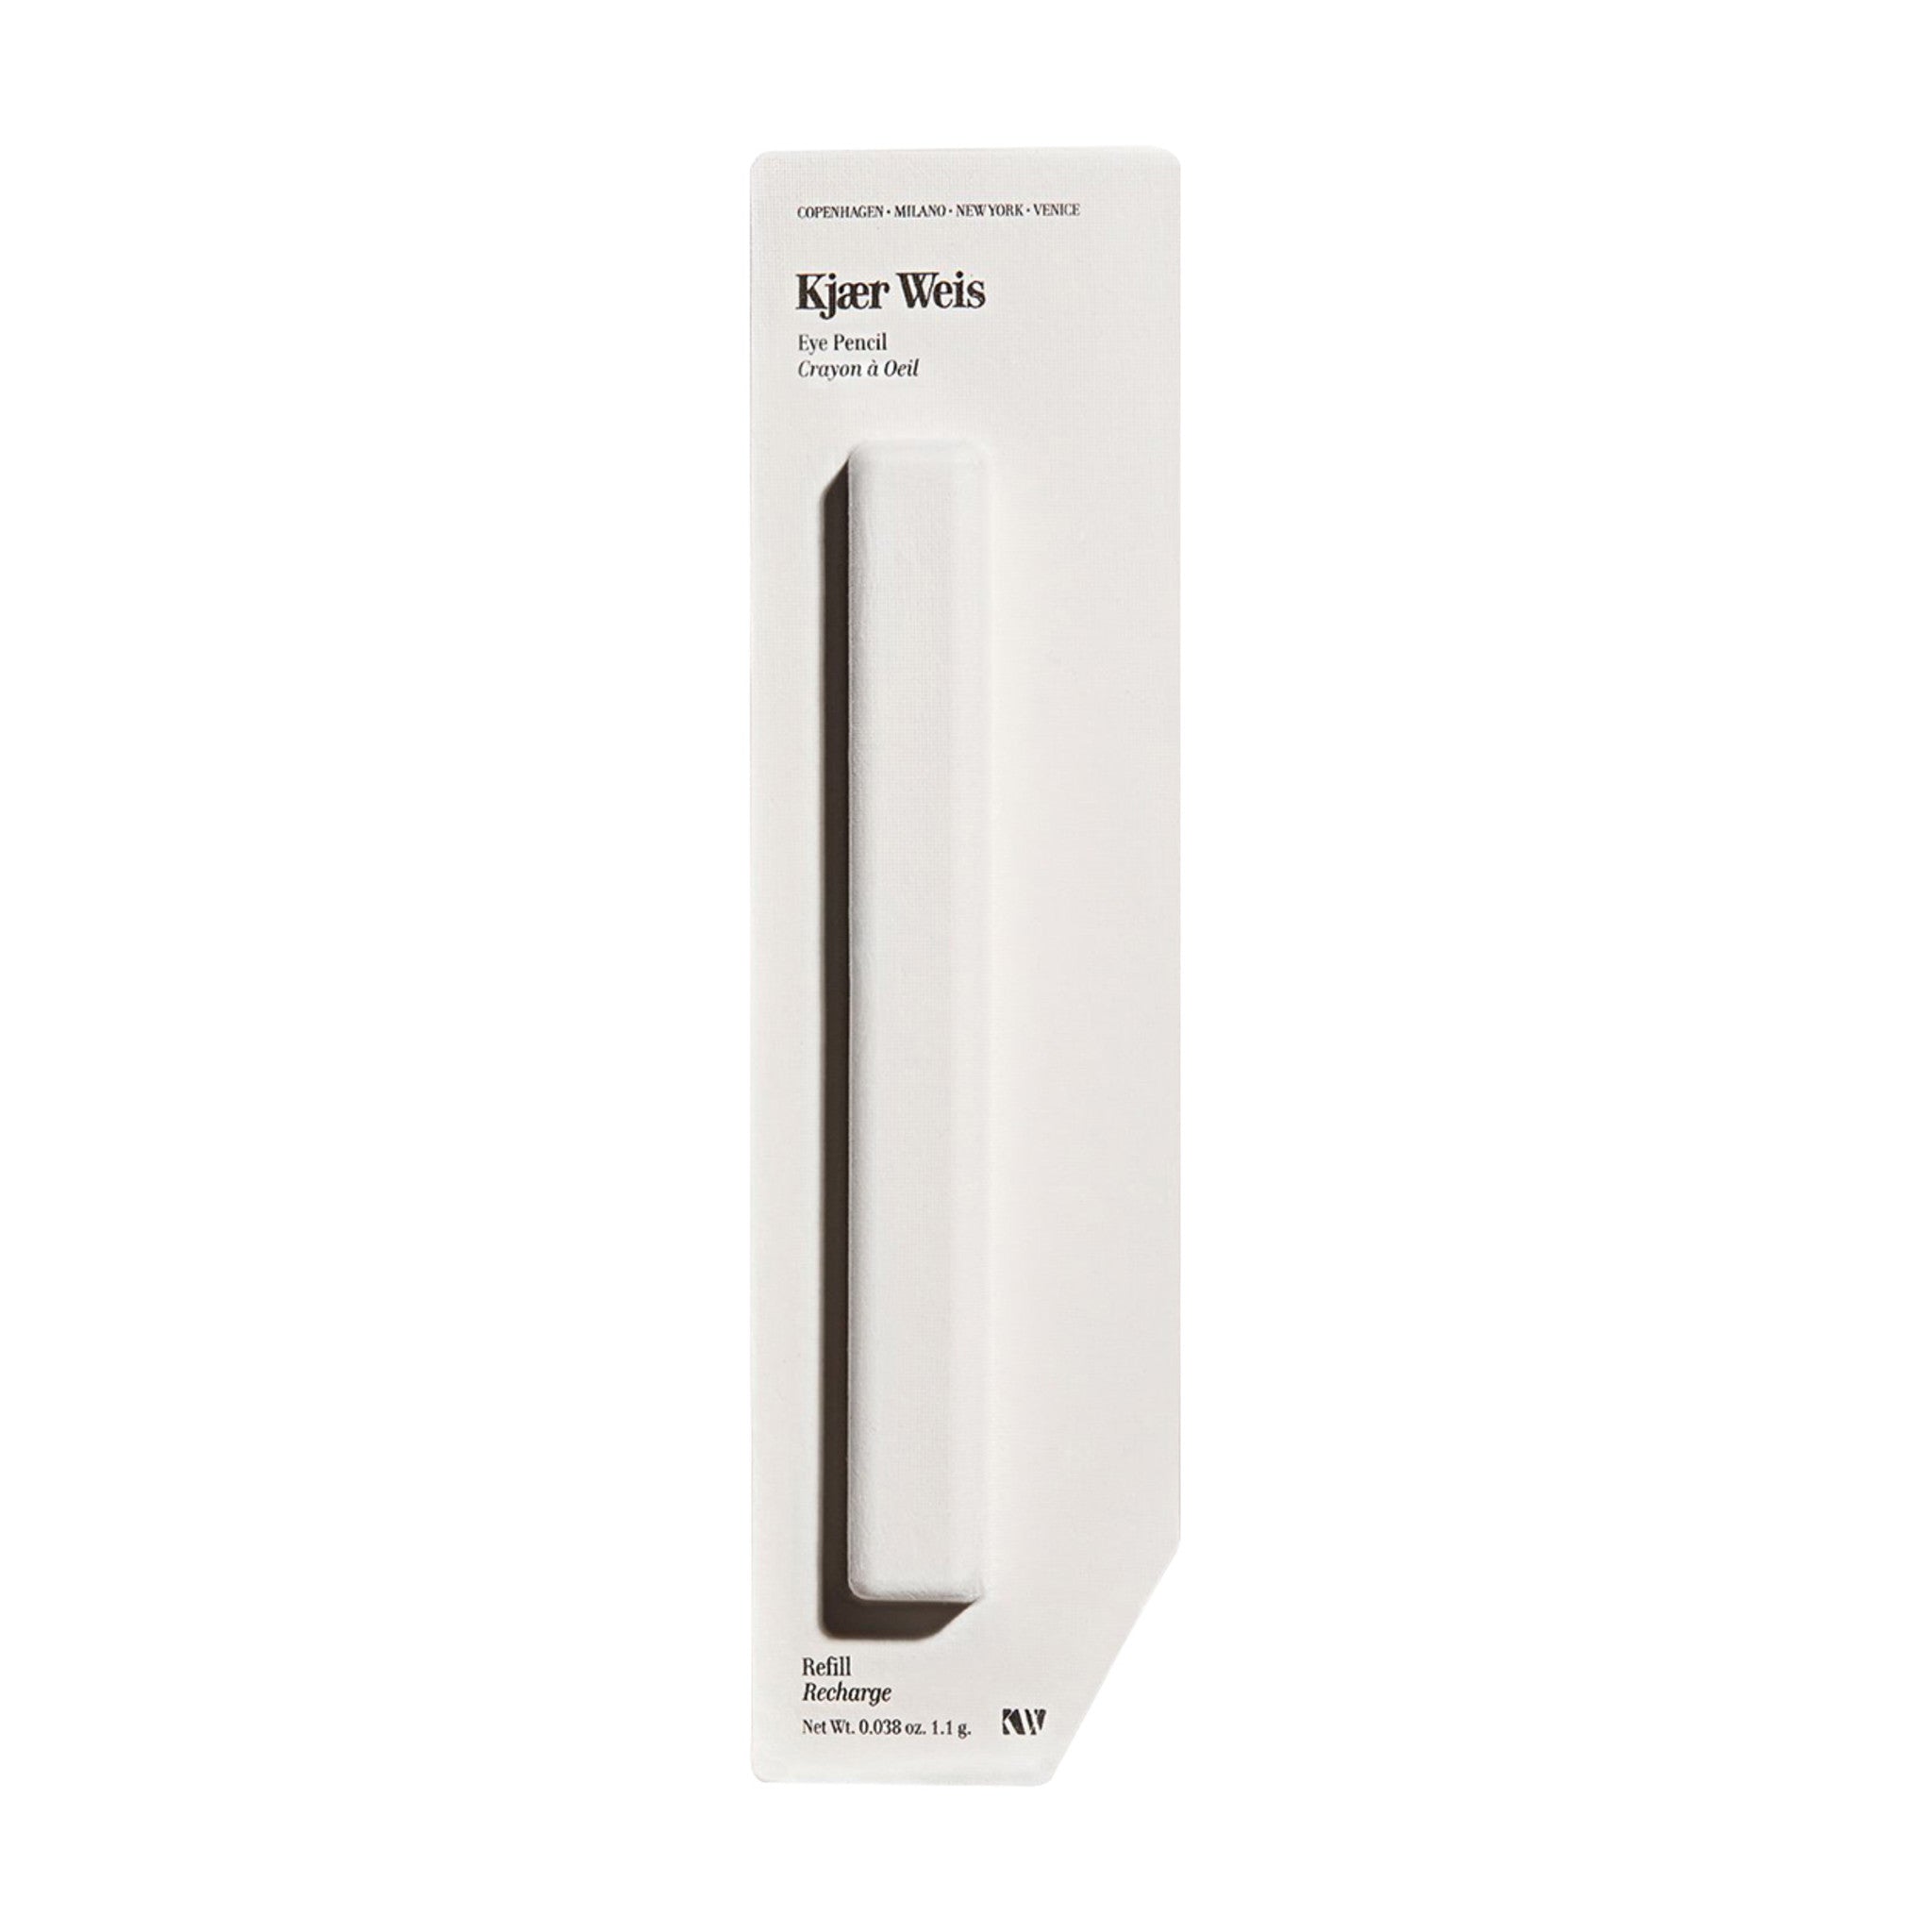 Kjaer Weis Eye Pencil Refill Color/Shade variant: Brown main image. This product is in the color brown